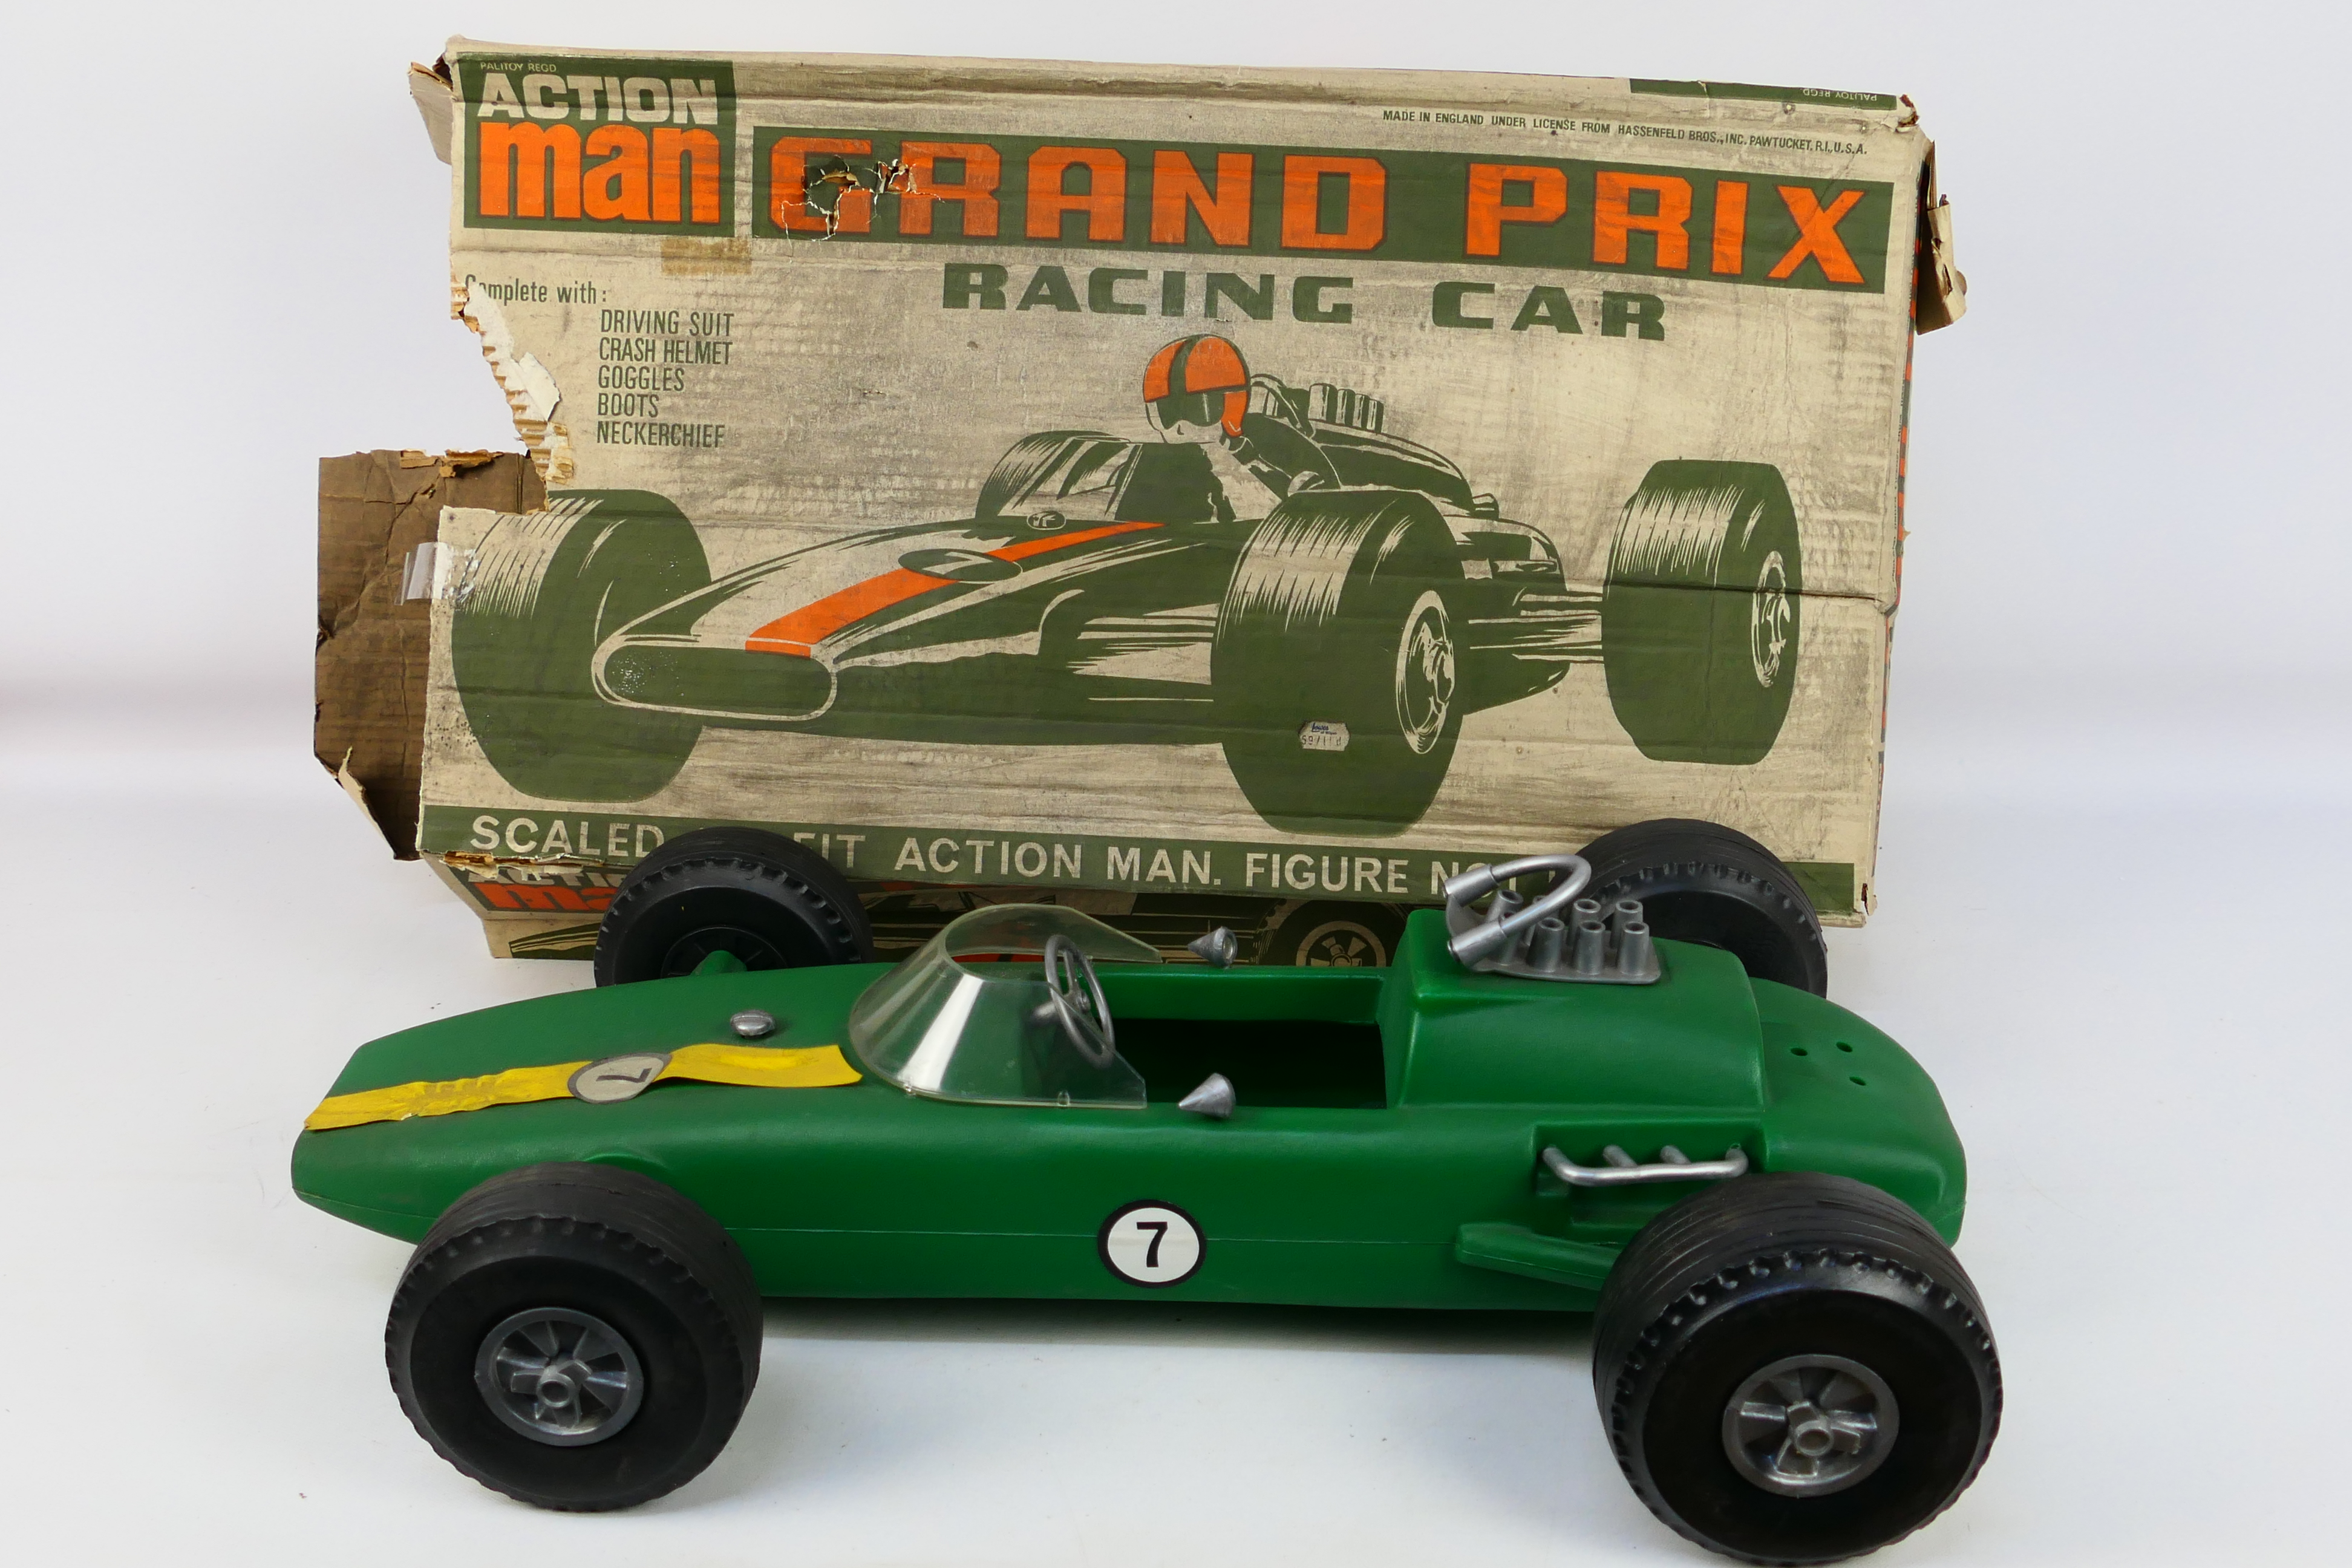 Palitoy - Action Man - An Action Man Grange Prix Racing Car (#34810) 60cm long This item is the car